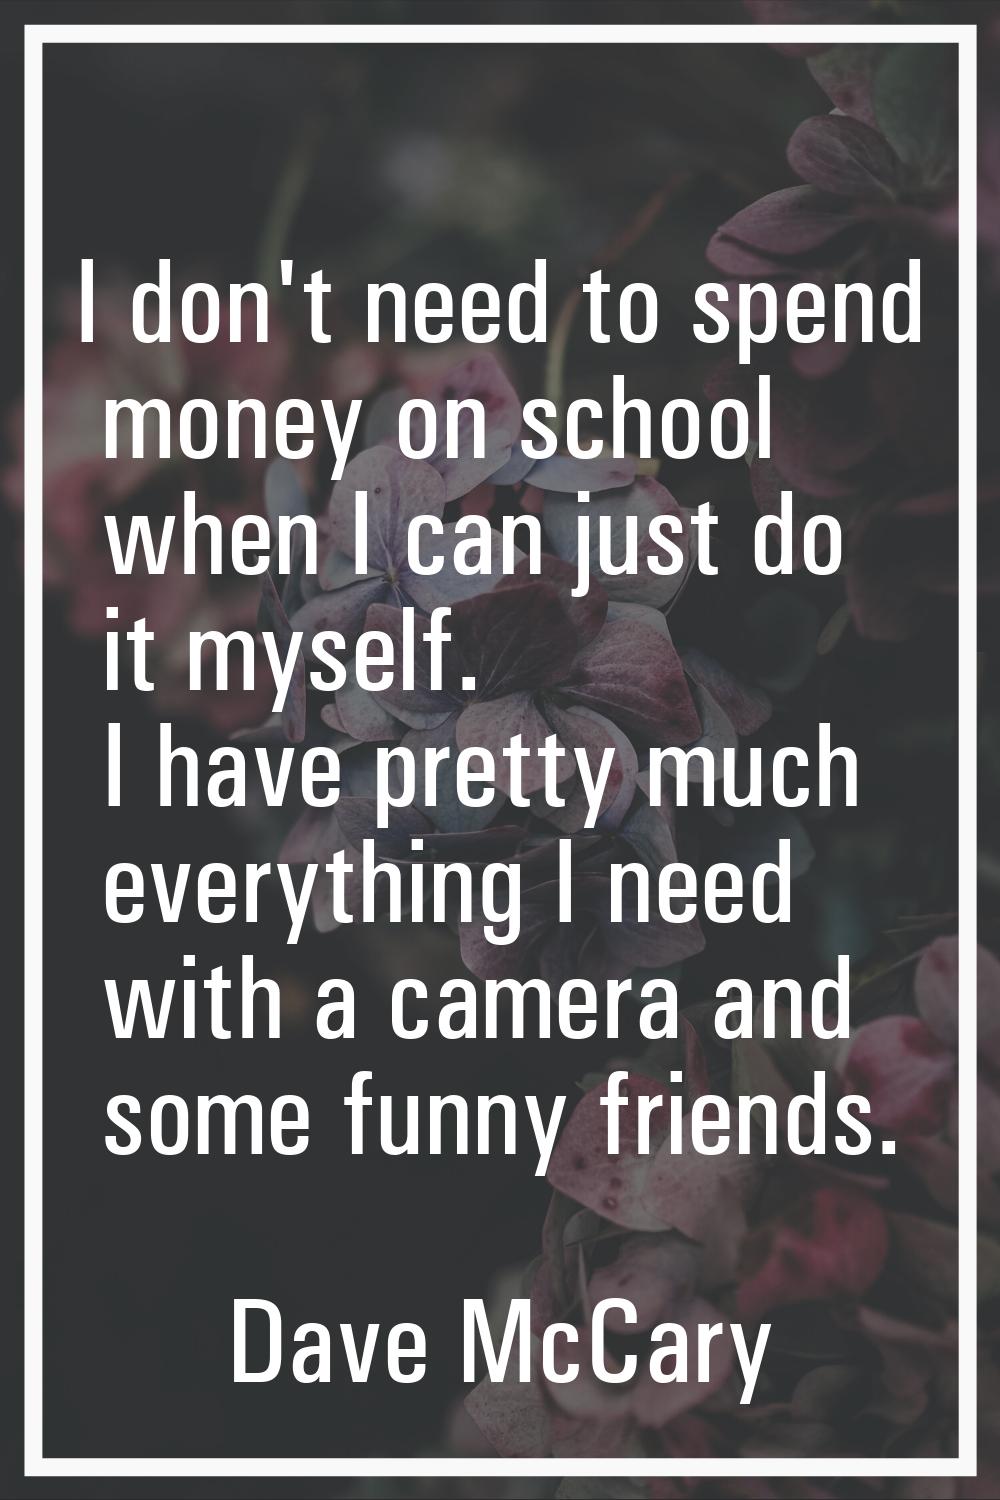 I don't need to spend money on school when I can just do it myself. I have pretty much everything I